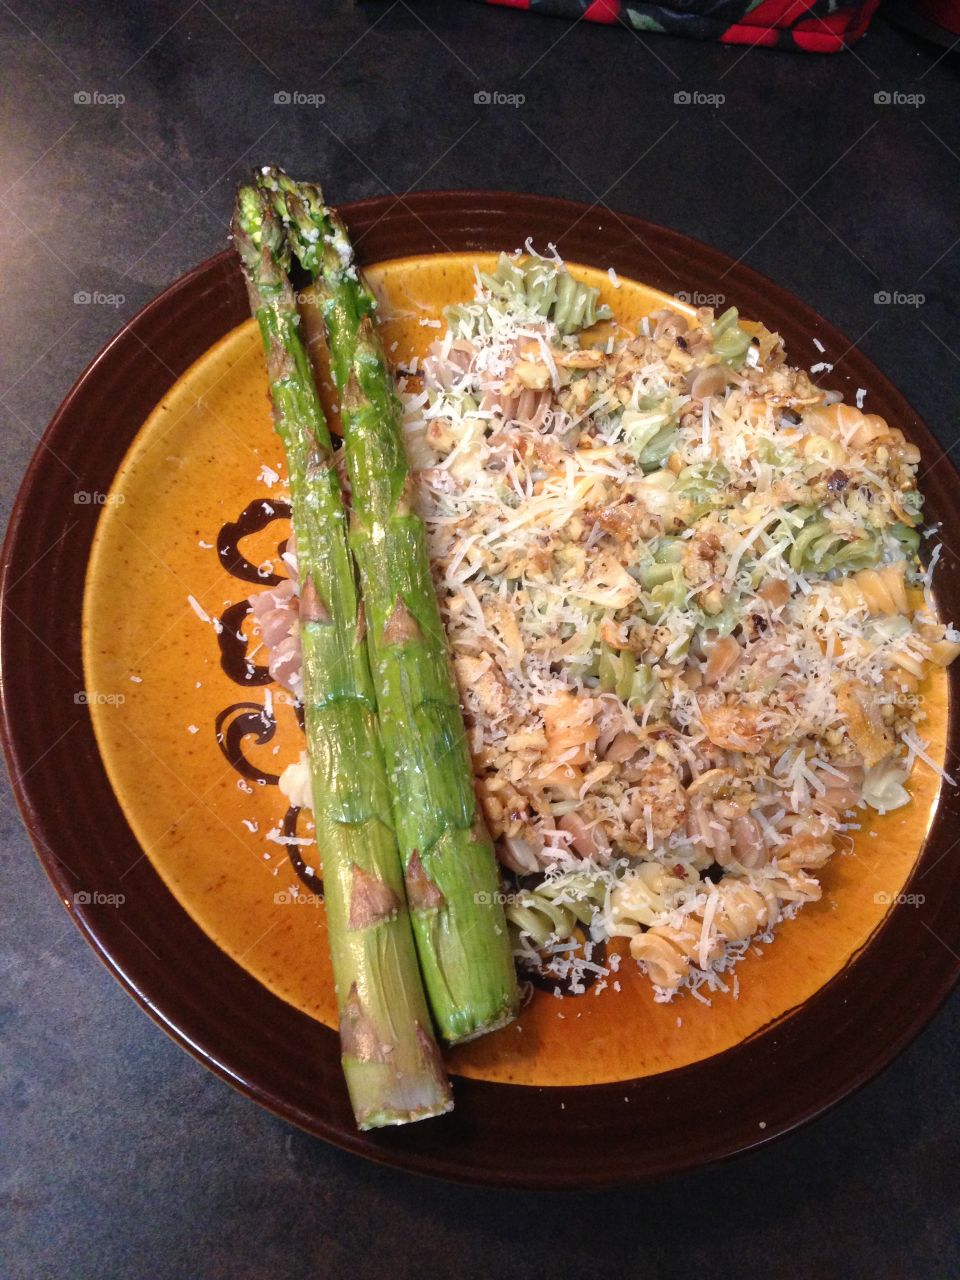 Rotini pasta with Parmesan and giant asparagus